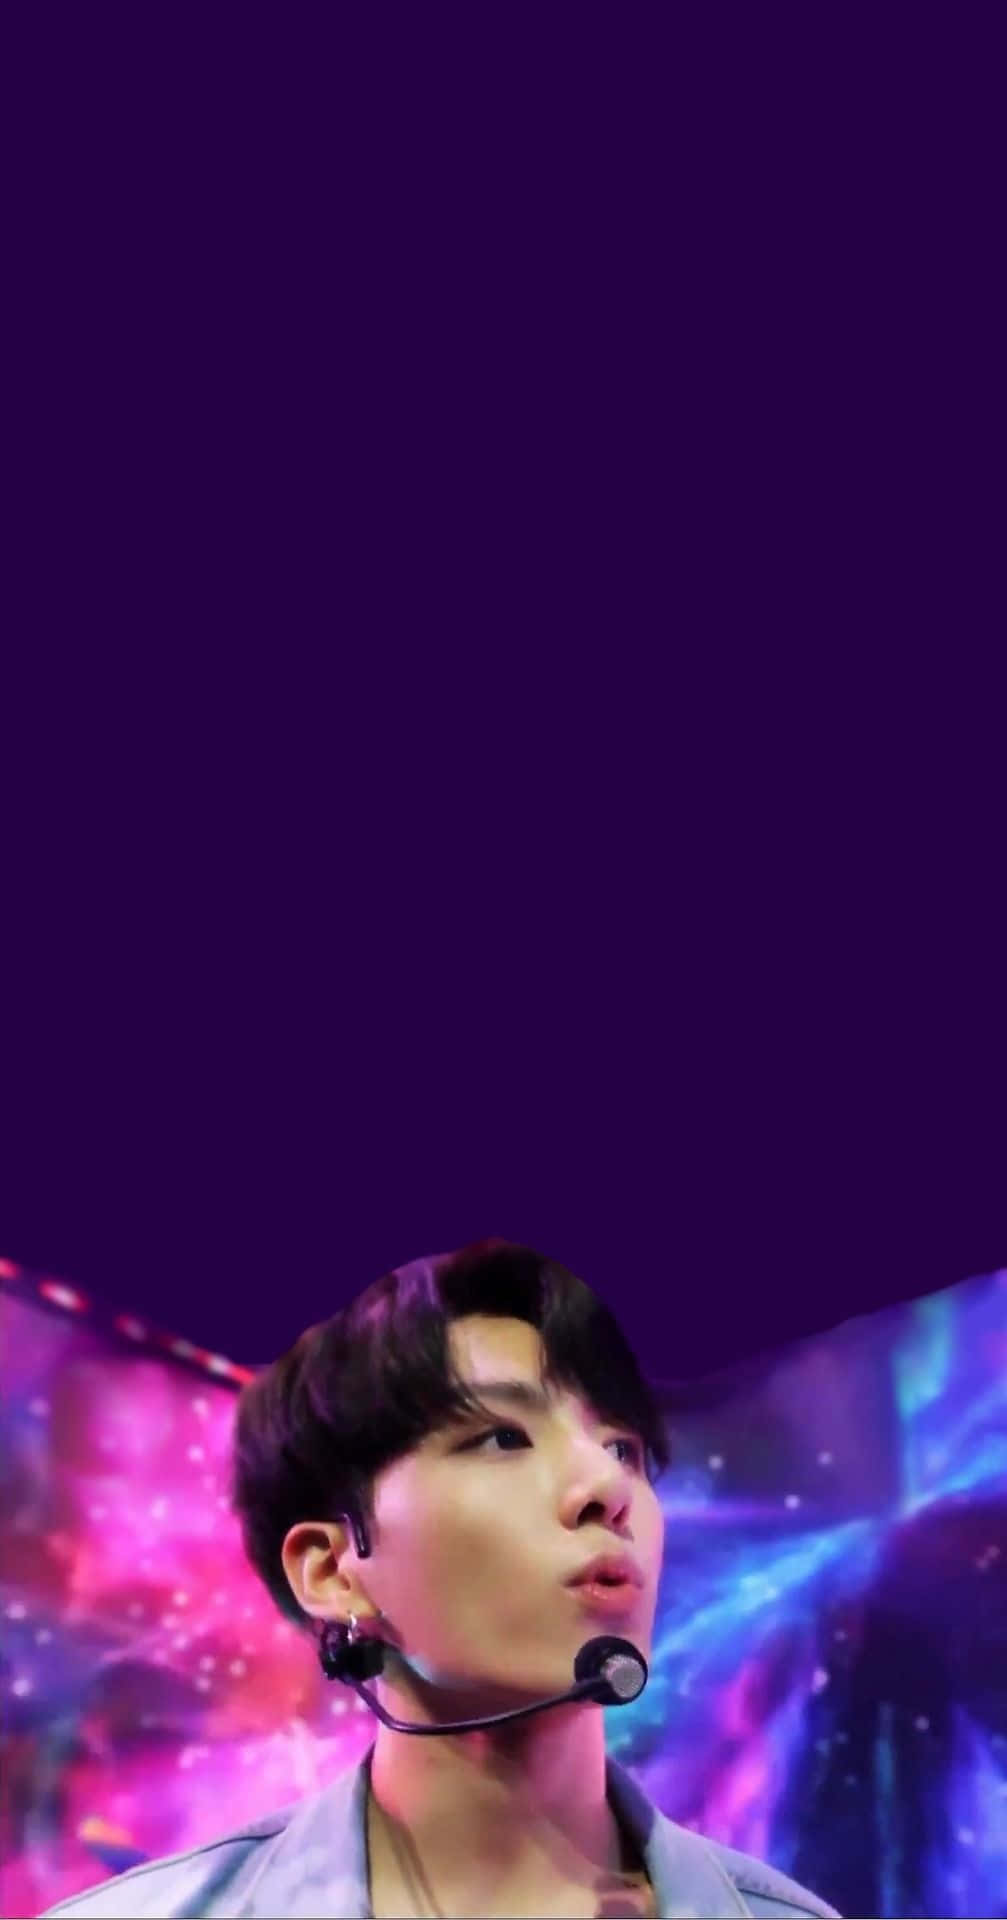 Iconic BTS performing live on stage Wallpaper